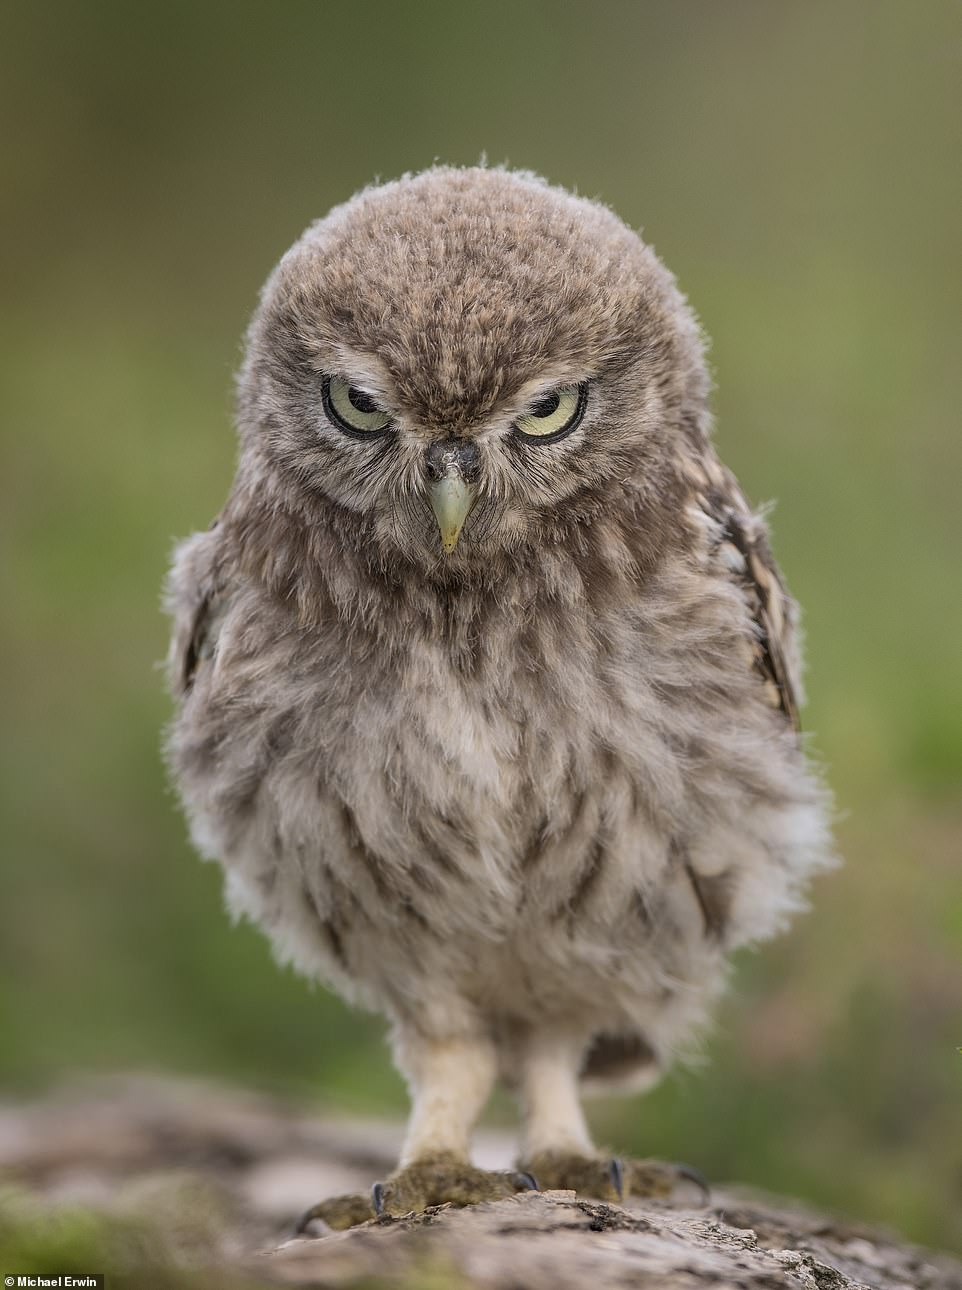 Angry Bird by Michael Erwin from Stoke-On-Trent, United Kingdom: 'A little owl stare as only they can'